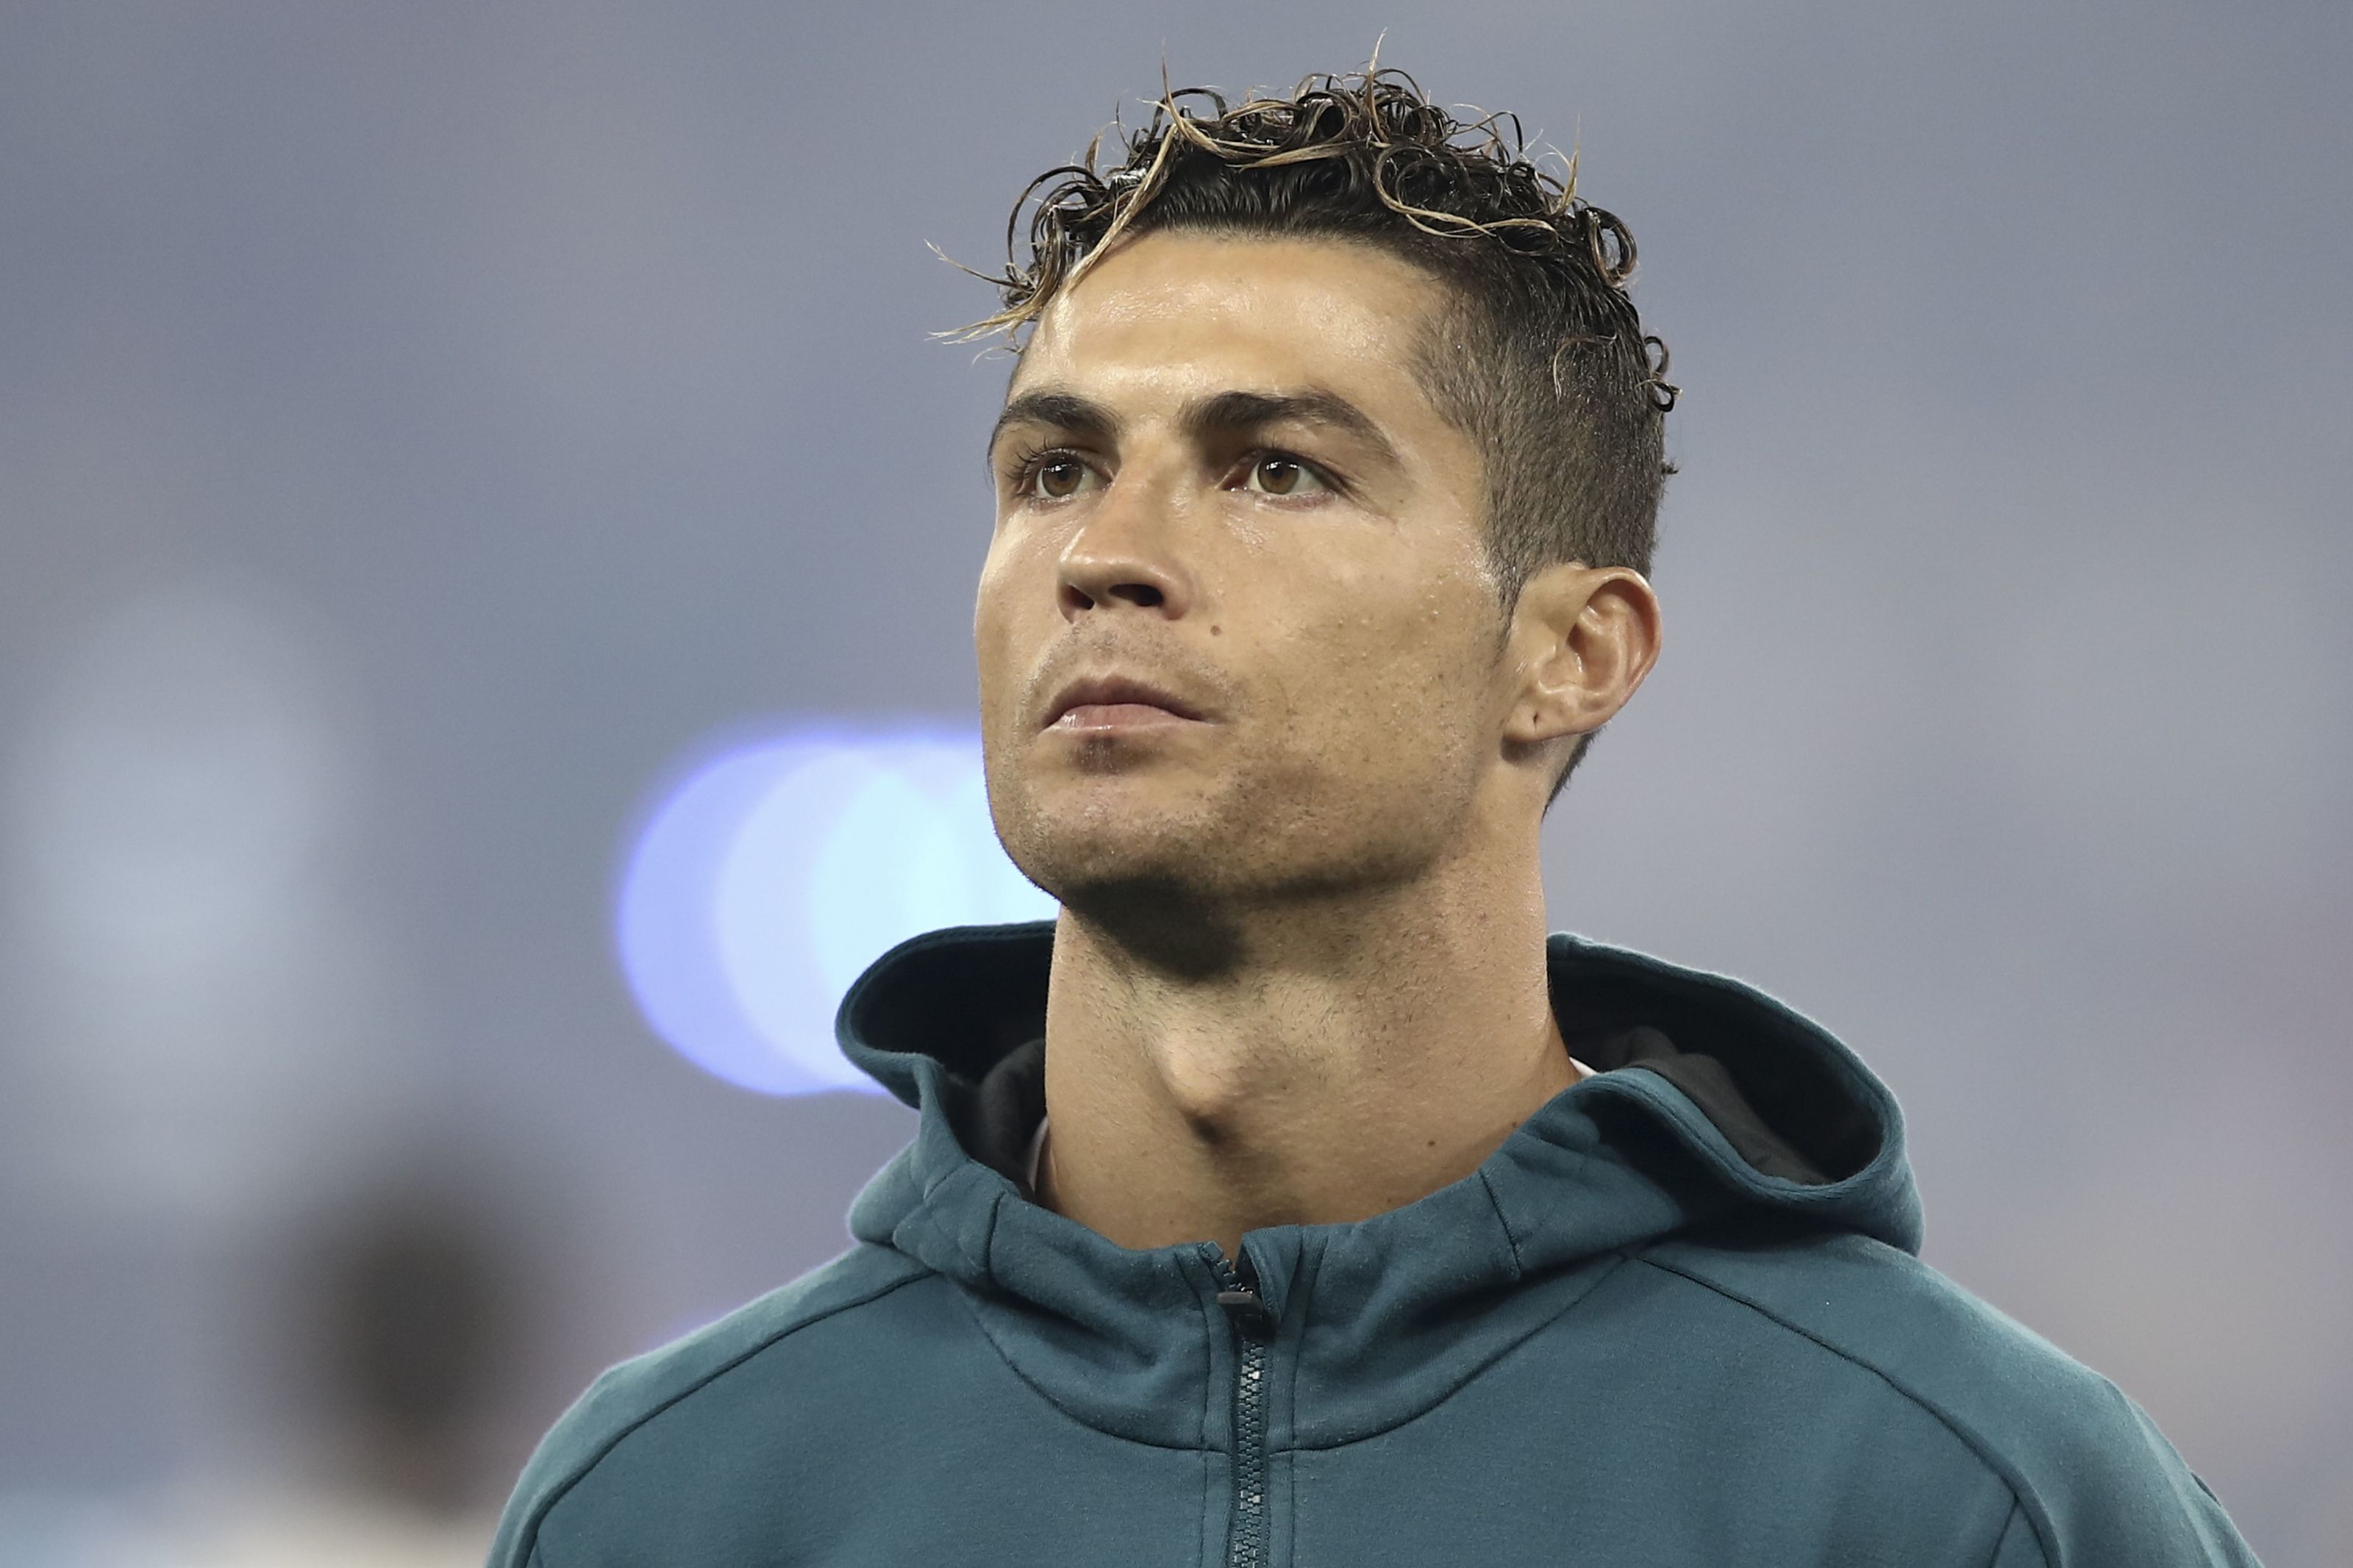 Barcelona REJECTED chance to link up Cristiano Ronaldo with Lionel Messi  for just £15million before Man Utd transfer